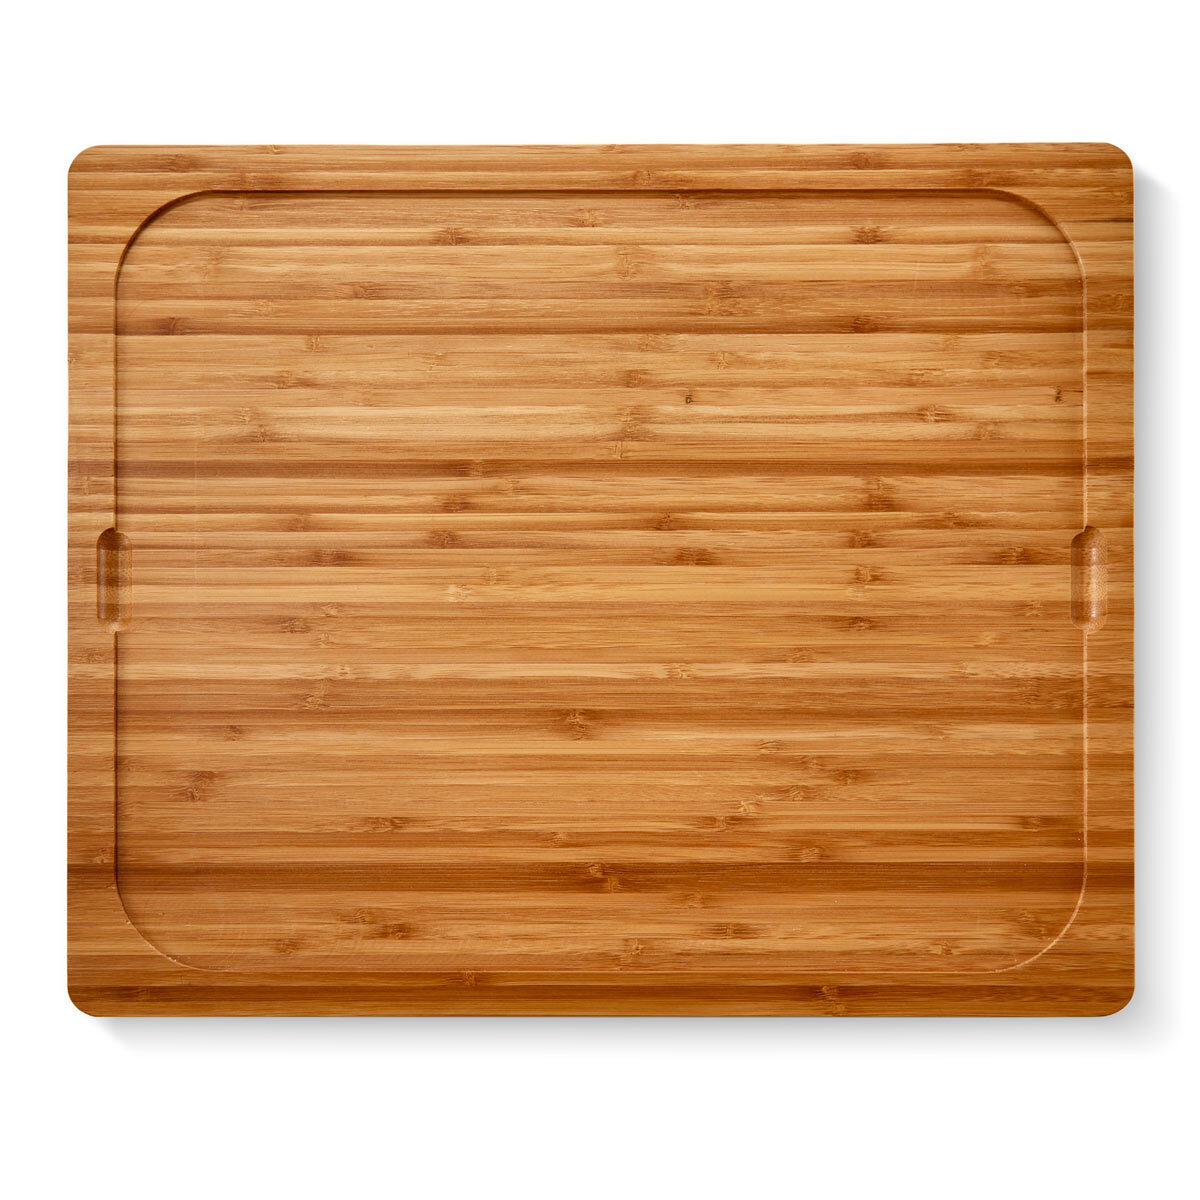 Seville Classics Bamboo Cutting Board with 7 Colour Coded Chopping Mats